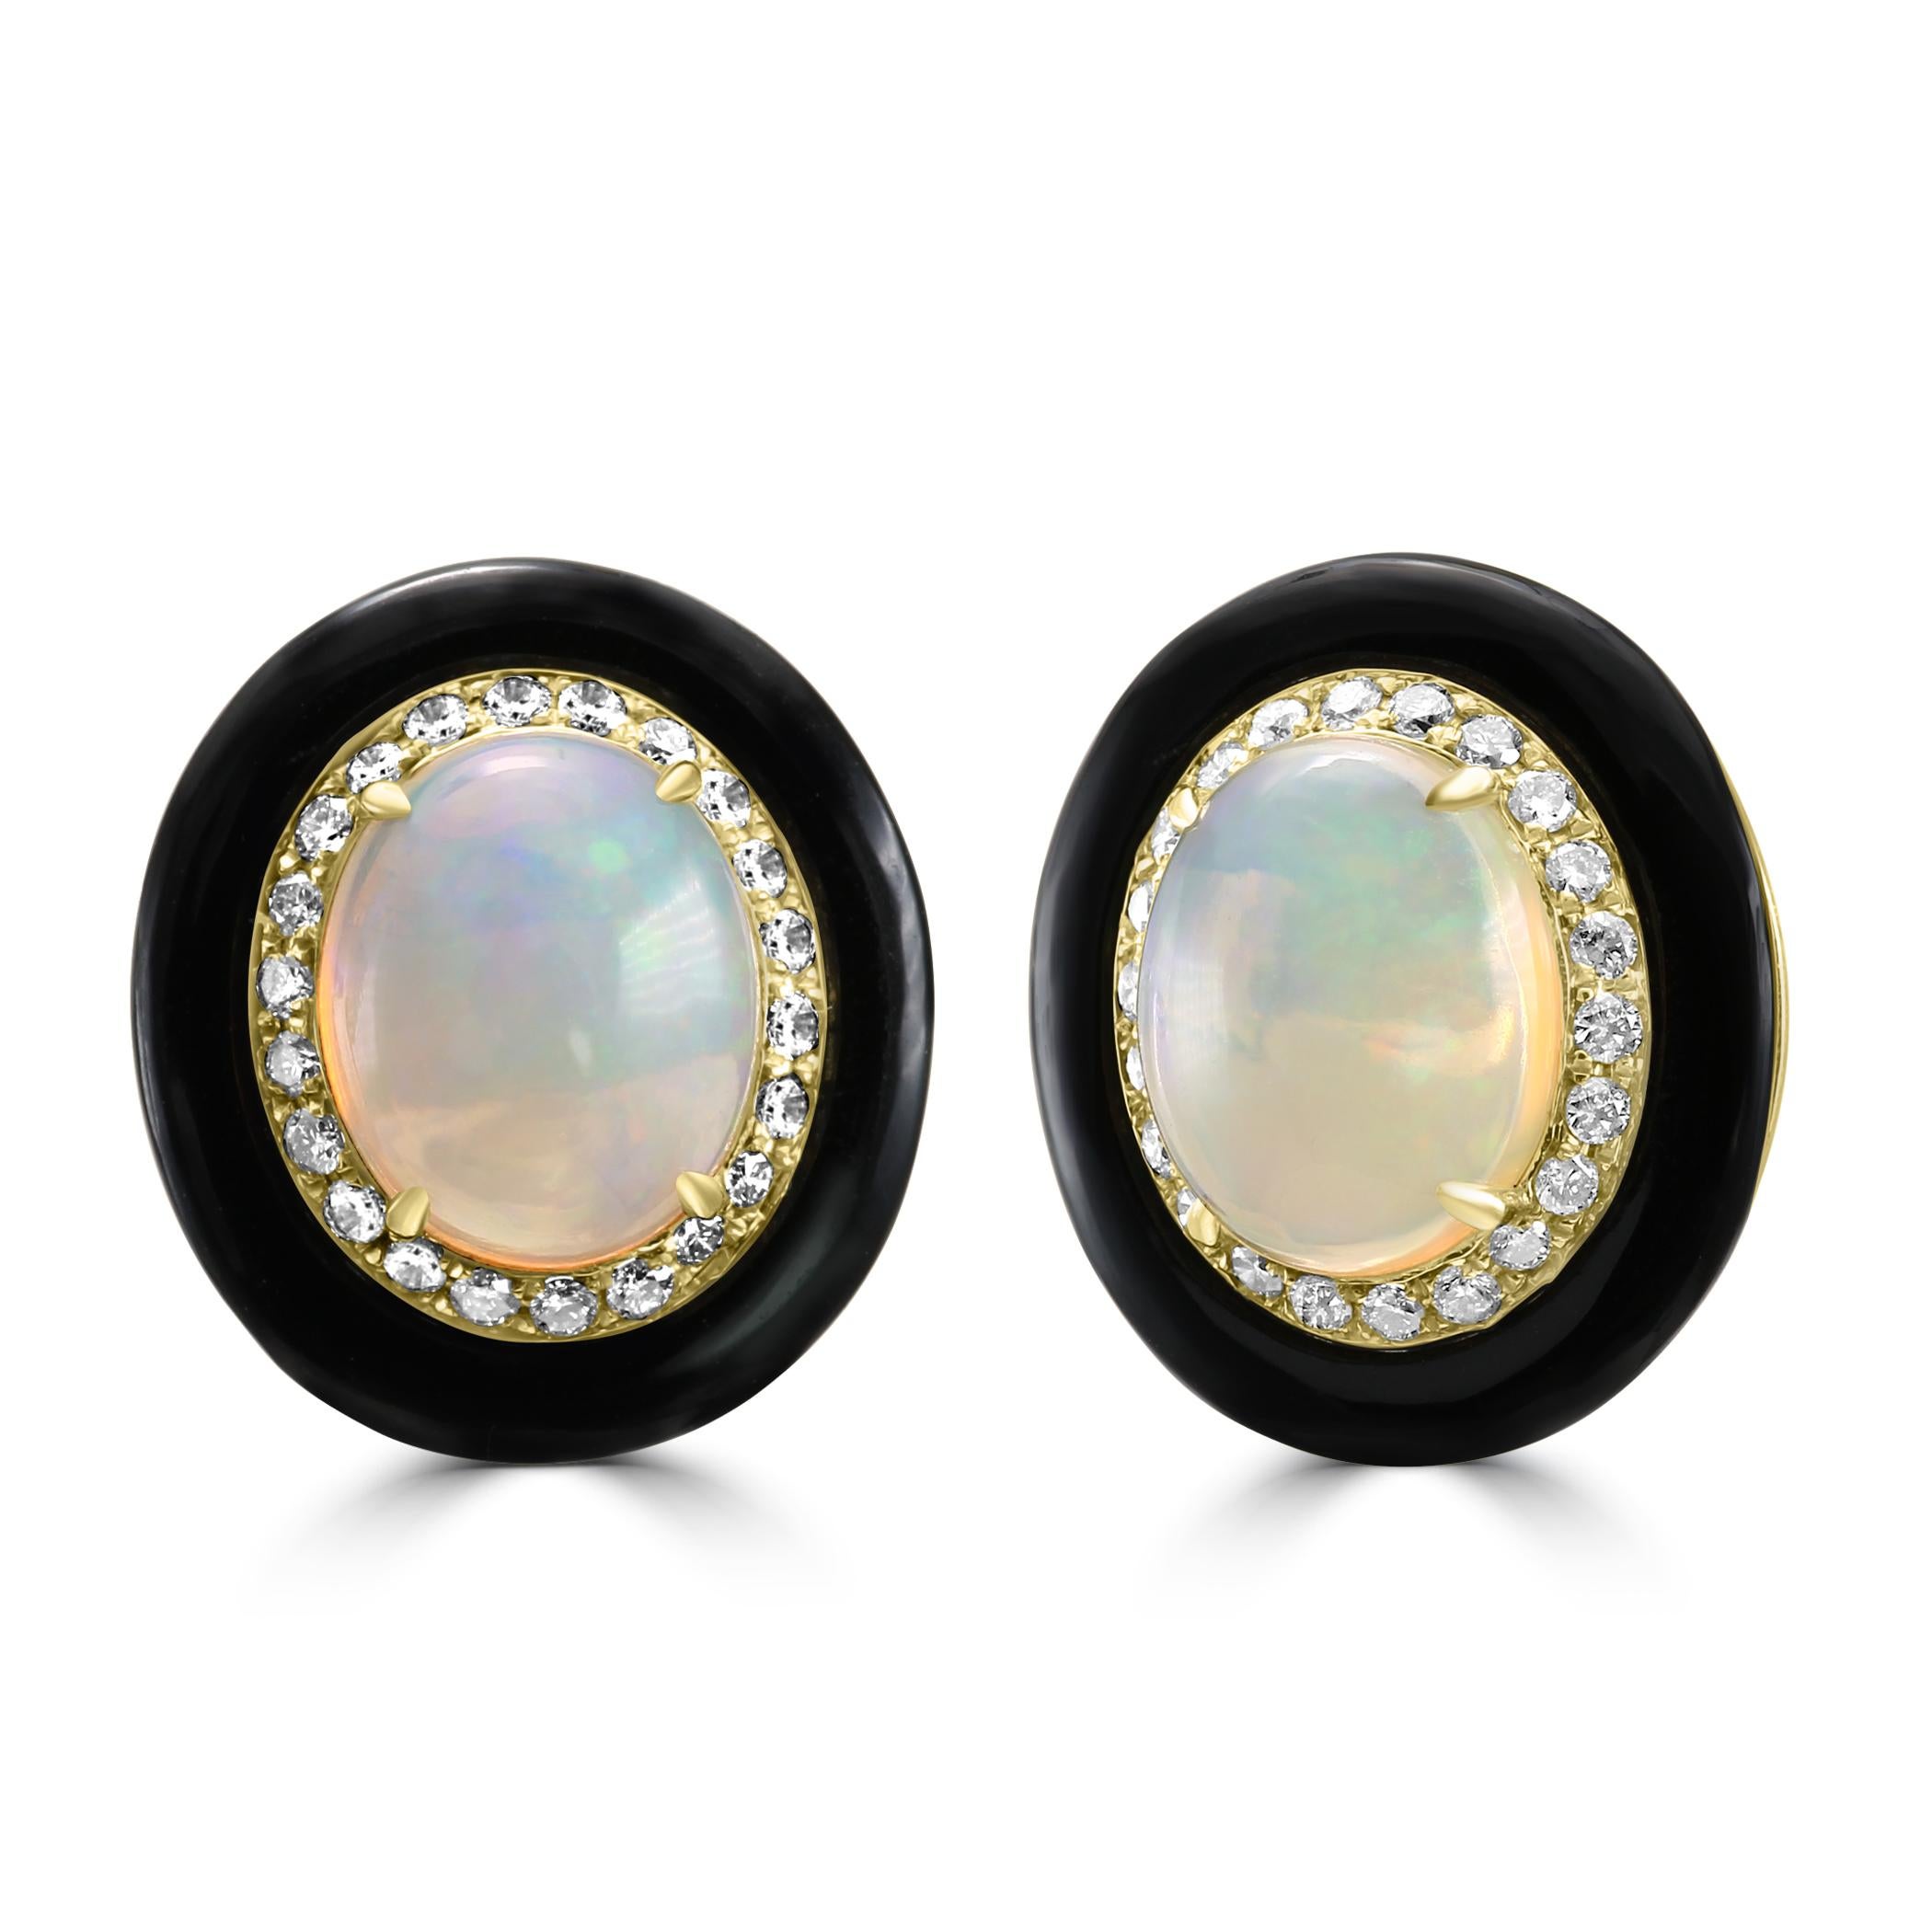 Expand your jewelry collection to a new level of opulence with our 18K yellow gold Opal earrings.

The center of each earring holds a mesmerizing Opal, meticulously chosen for its impressive size and iridescent play of colors. With a combined weight